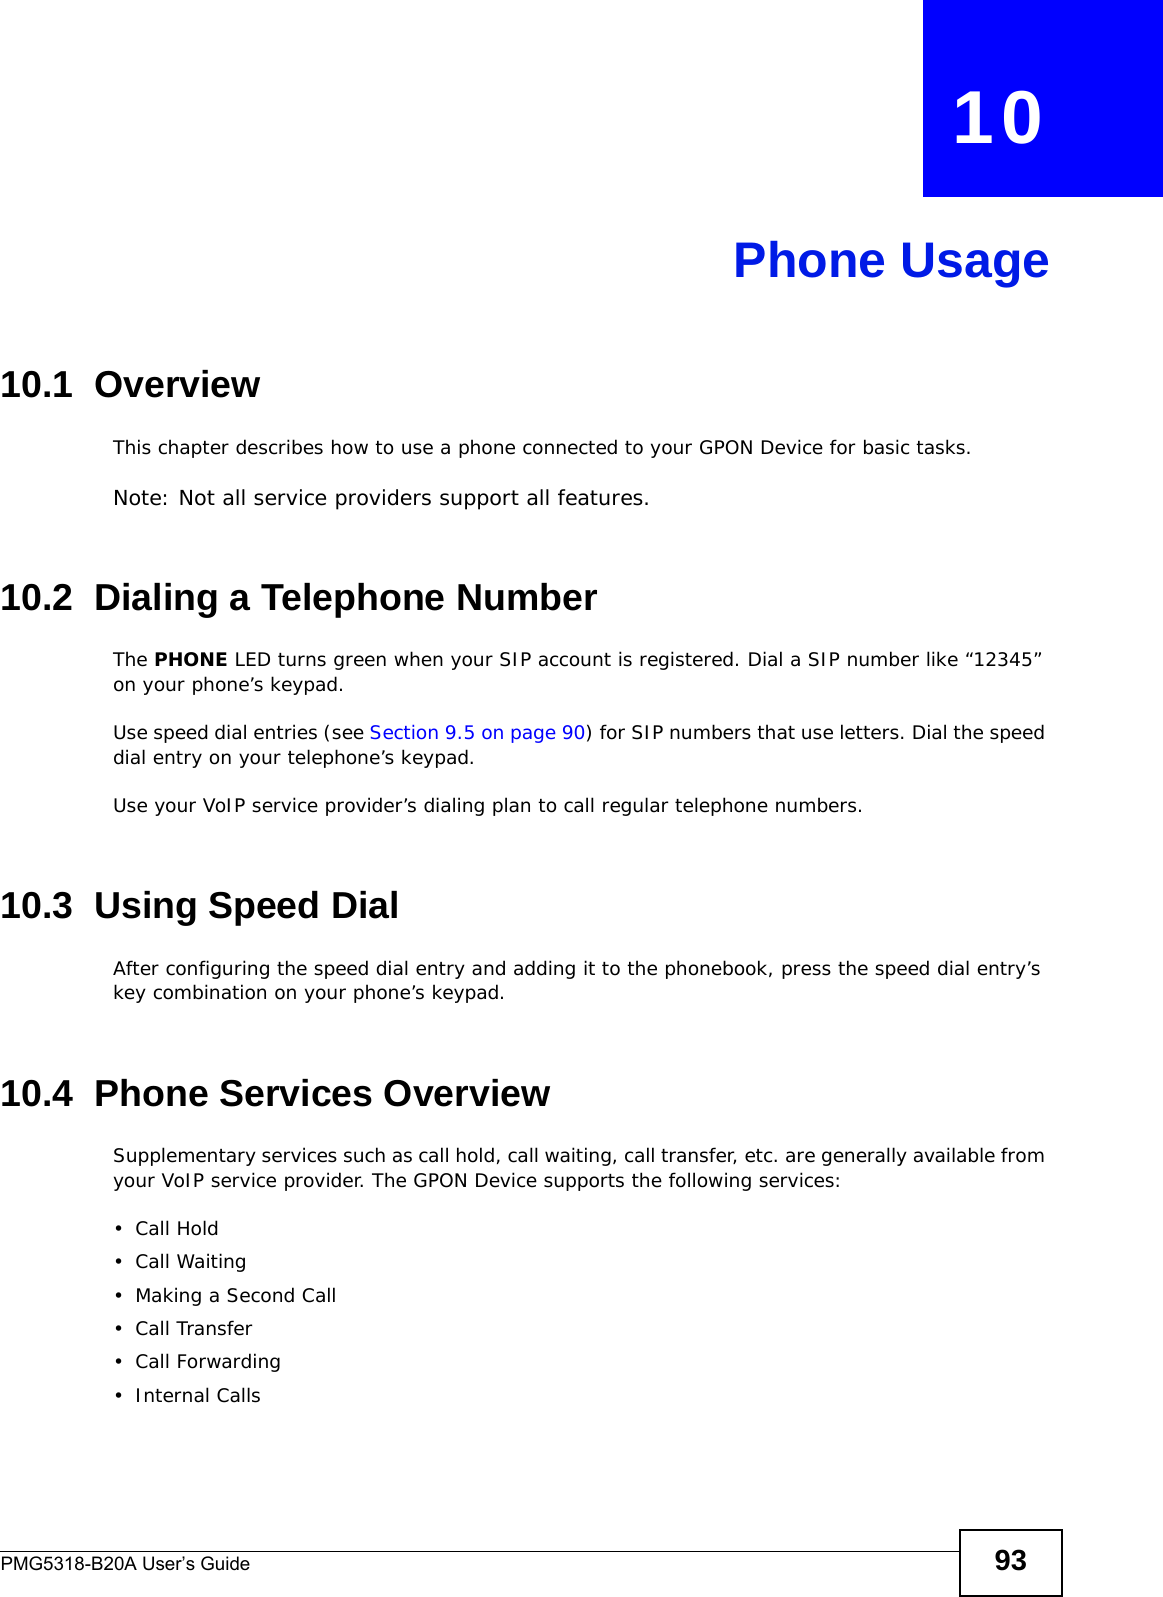 PMG5318-B20A User’s Guide 93CHAPTER   10Phone Usage10.1  OverviewThis chapter describes how to use a phone connected to your GPON Device for basic tasks.Note: Not all service providers support all features.10.2  Dialing a Telephone NumberThe PHONE LED turns green when your SIP account is registered. Dial a SIP number like “12345” on your phone’s keypad. Use speed dial entries (see Section 9.5 on page 90) for SIP numbers that use letters. Dial the speed dial entry on your telephone’s keypad. Use your VoIP service provider’s dialing plan to call regular telephone numbers.10.3  Using Speed DialAfter configuring the speed dial entry and adding it to the phonebook, press the speed dial entry’s key combination on your phone’s keypad.10.4  Phone Services OverviewSupplementary services such as call hold, call waiting, call transfer, etc. are generally available from your VoIP service provider. The GPON Device supports the following services:•Call Hold• Call Waiting• Making a Second Call• Call Transfer• Call Forwarding• Internal Calls